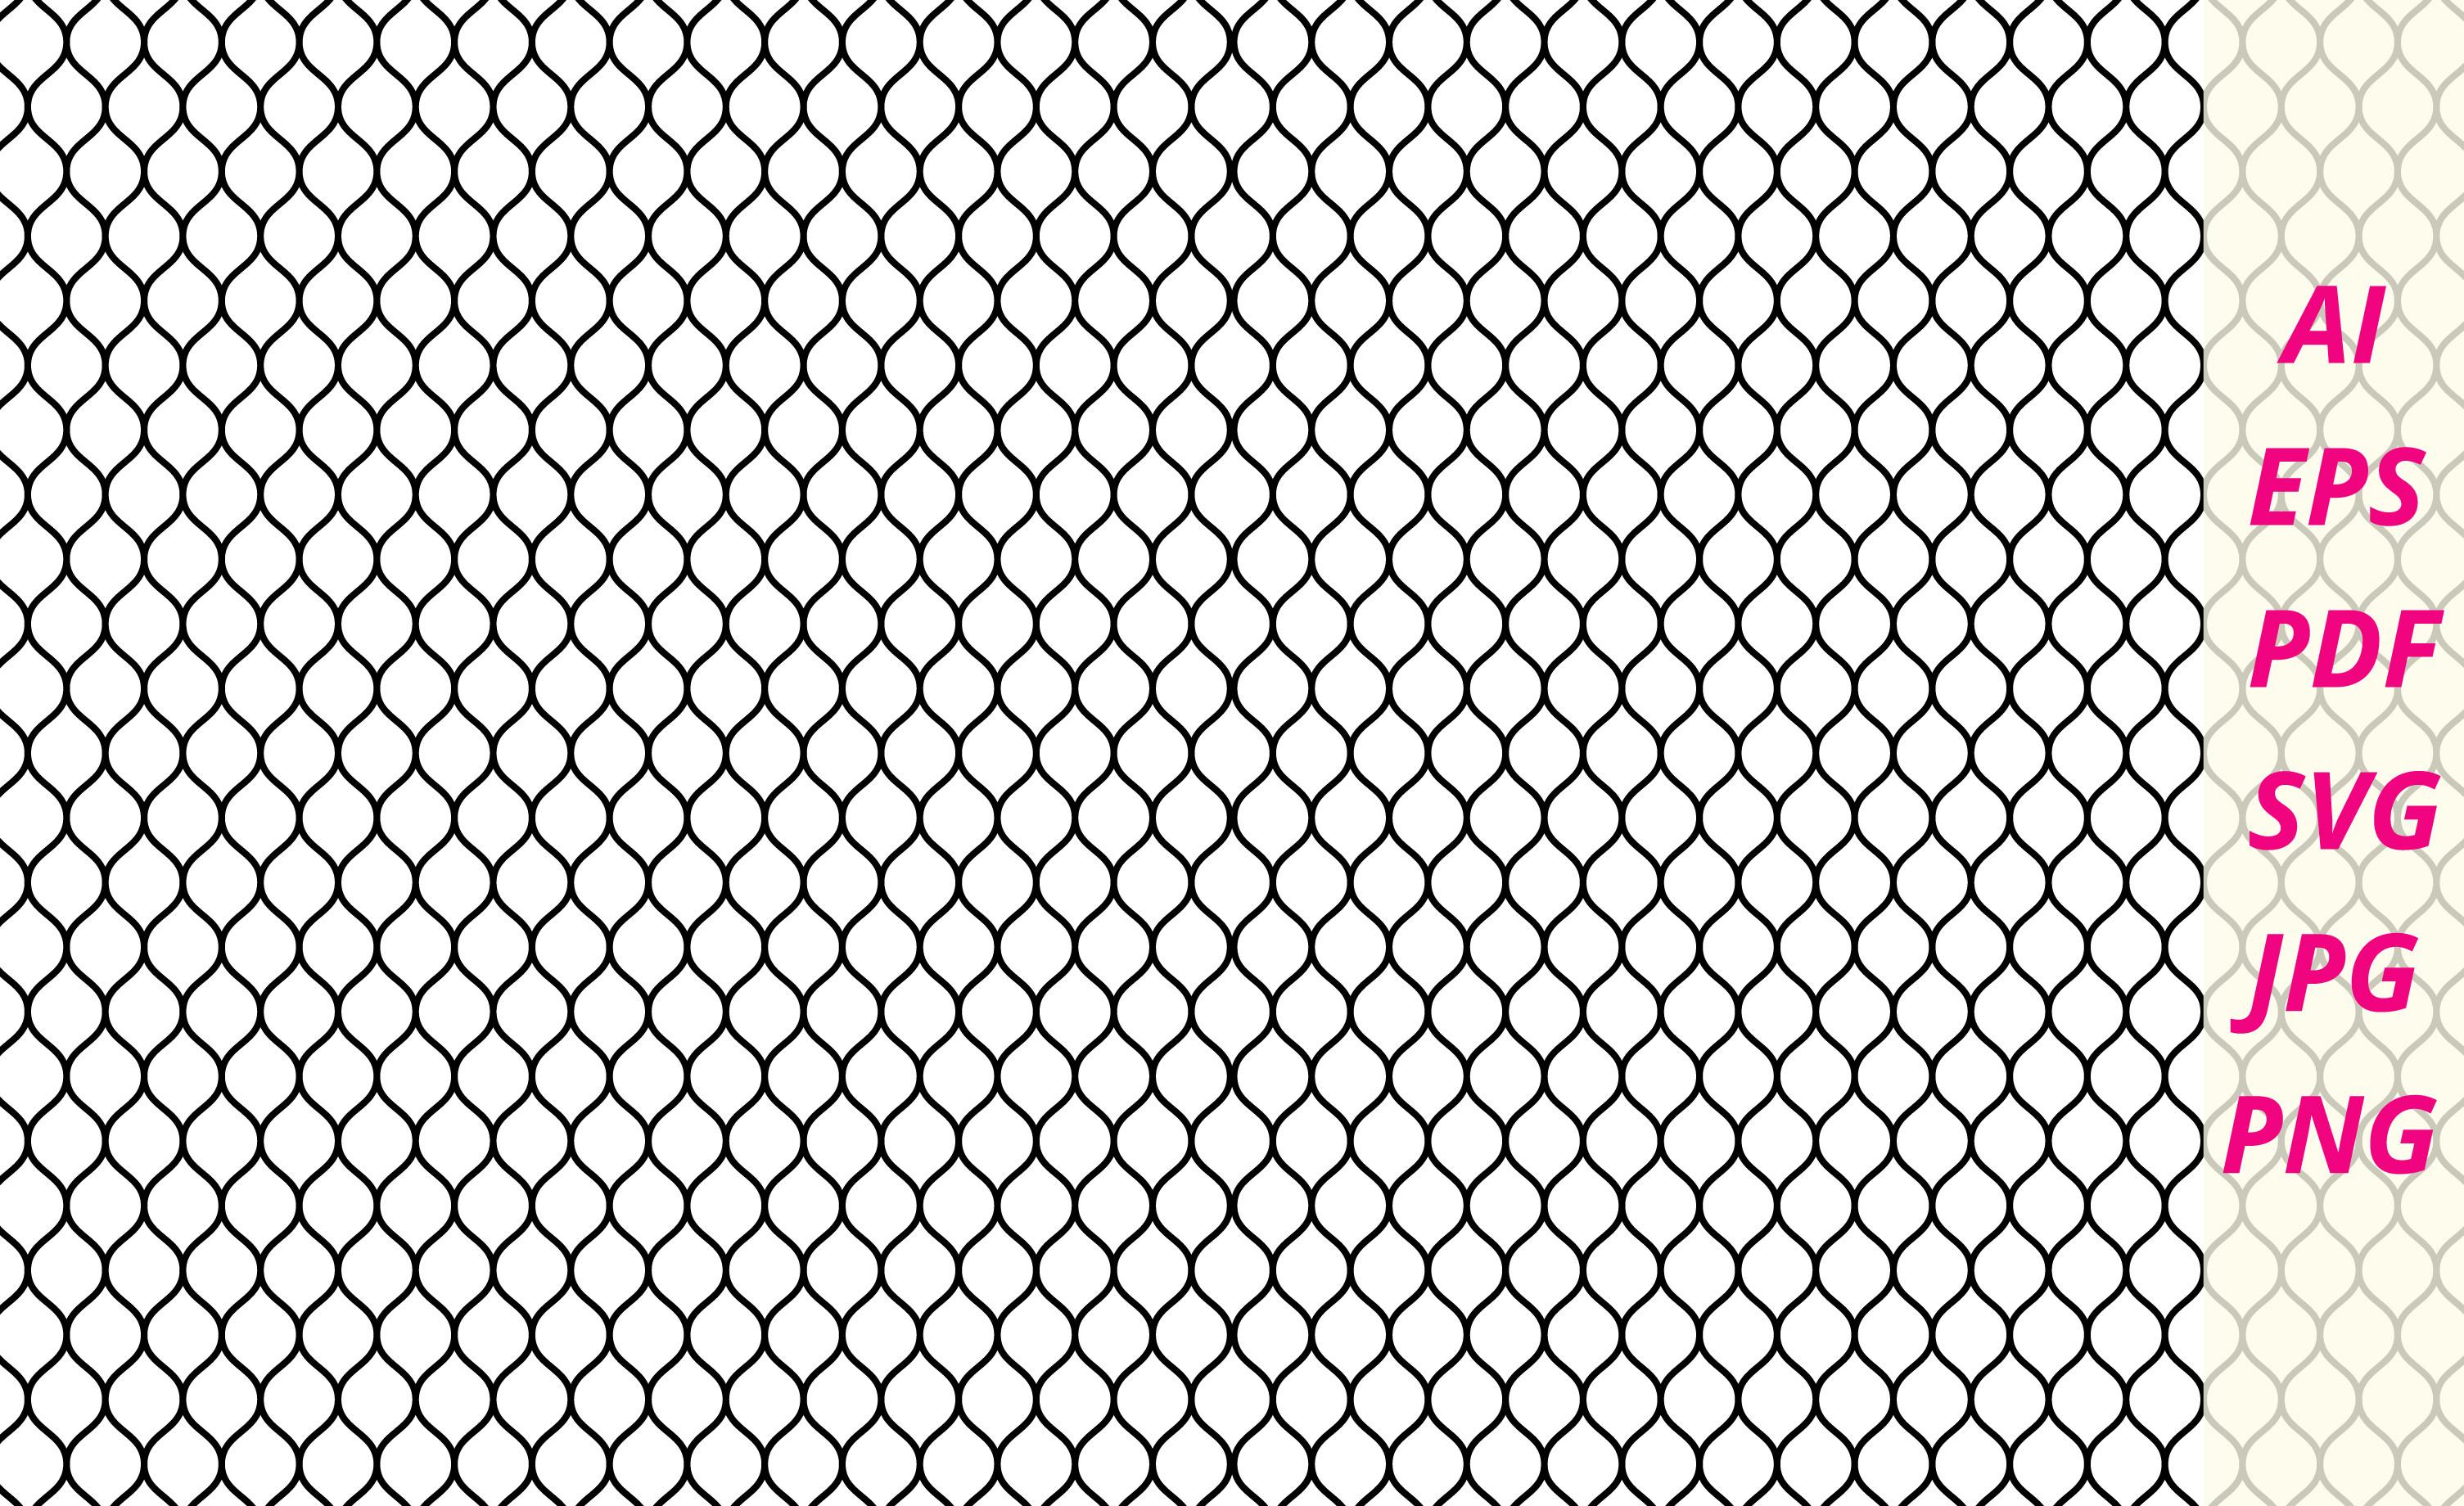 Grill Mesh Cage Octagon Seamless Pattern